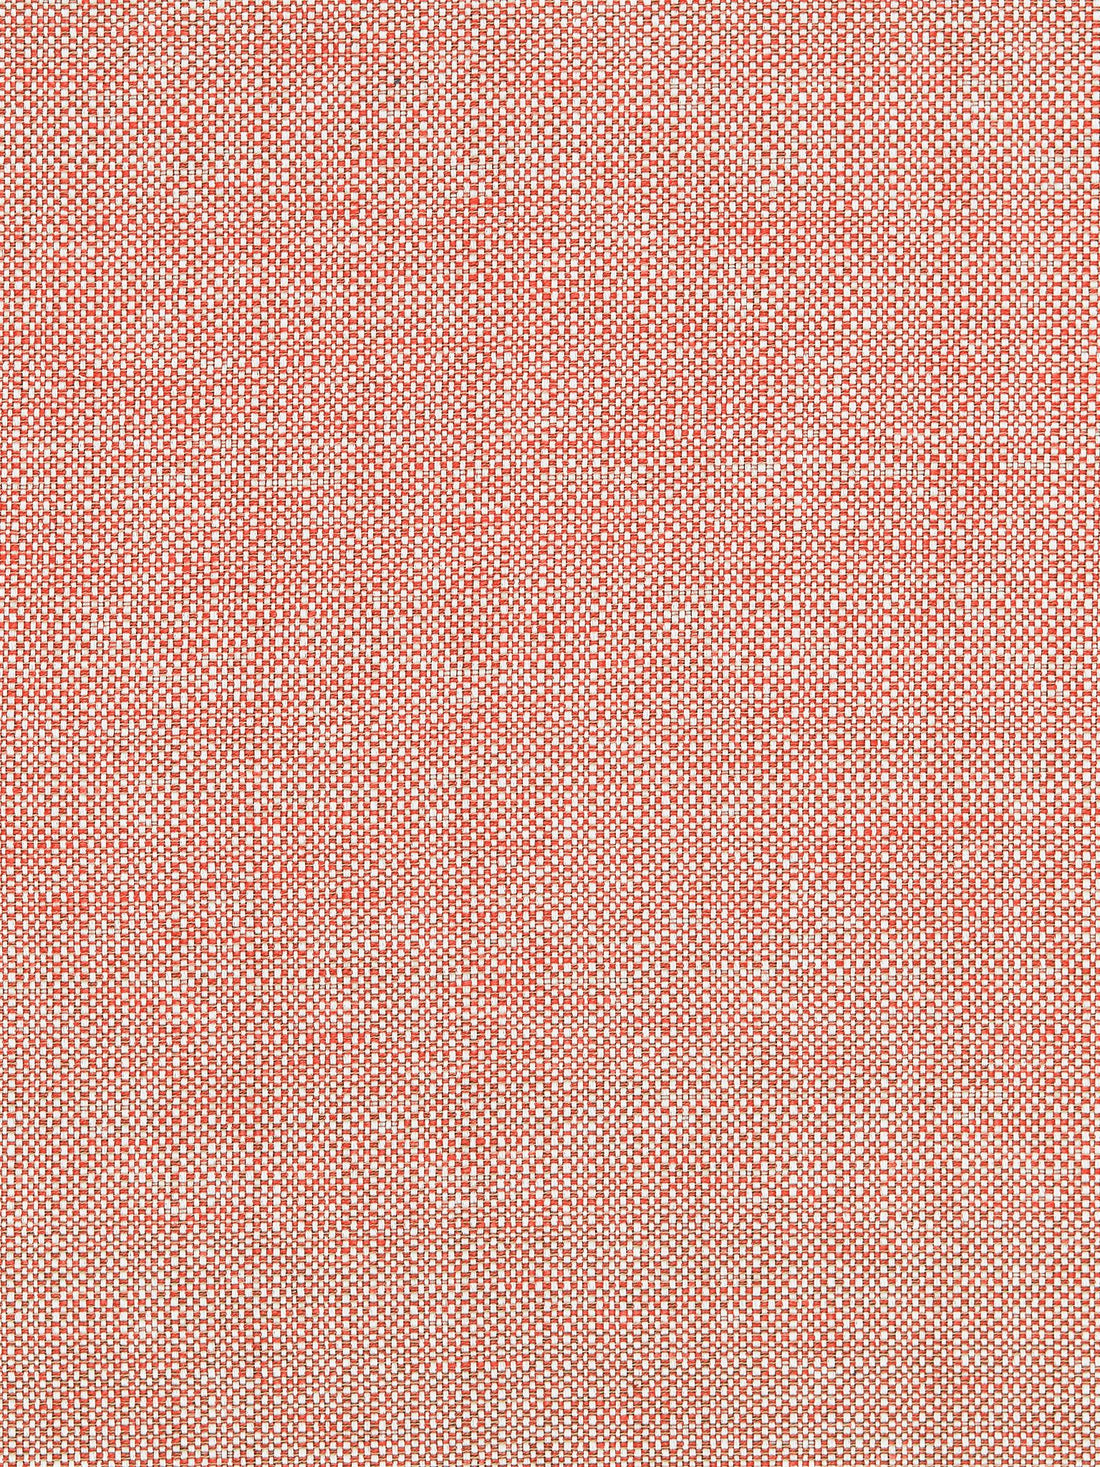 Chester Weave fabric in coral color - pattern number BK 0007K65118 - by Scalamandre in the Old World Weavers collection